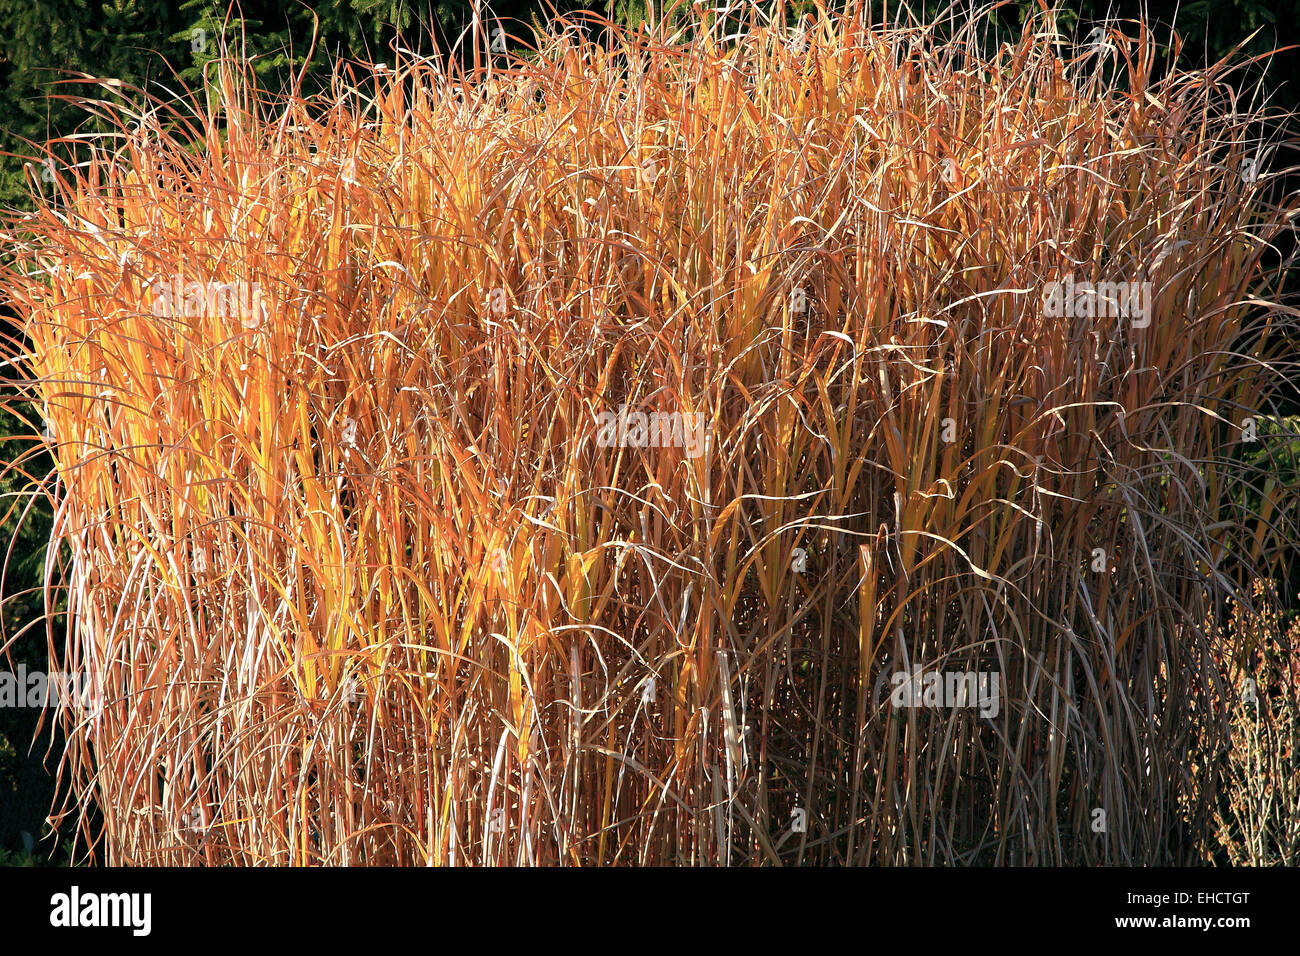 Dried reed Stock Photo